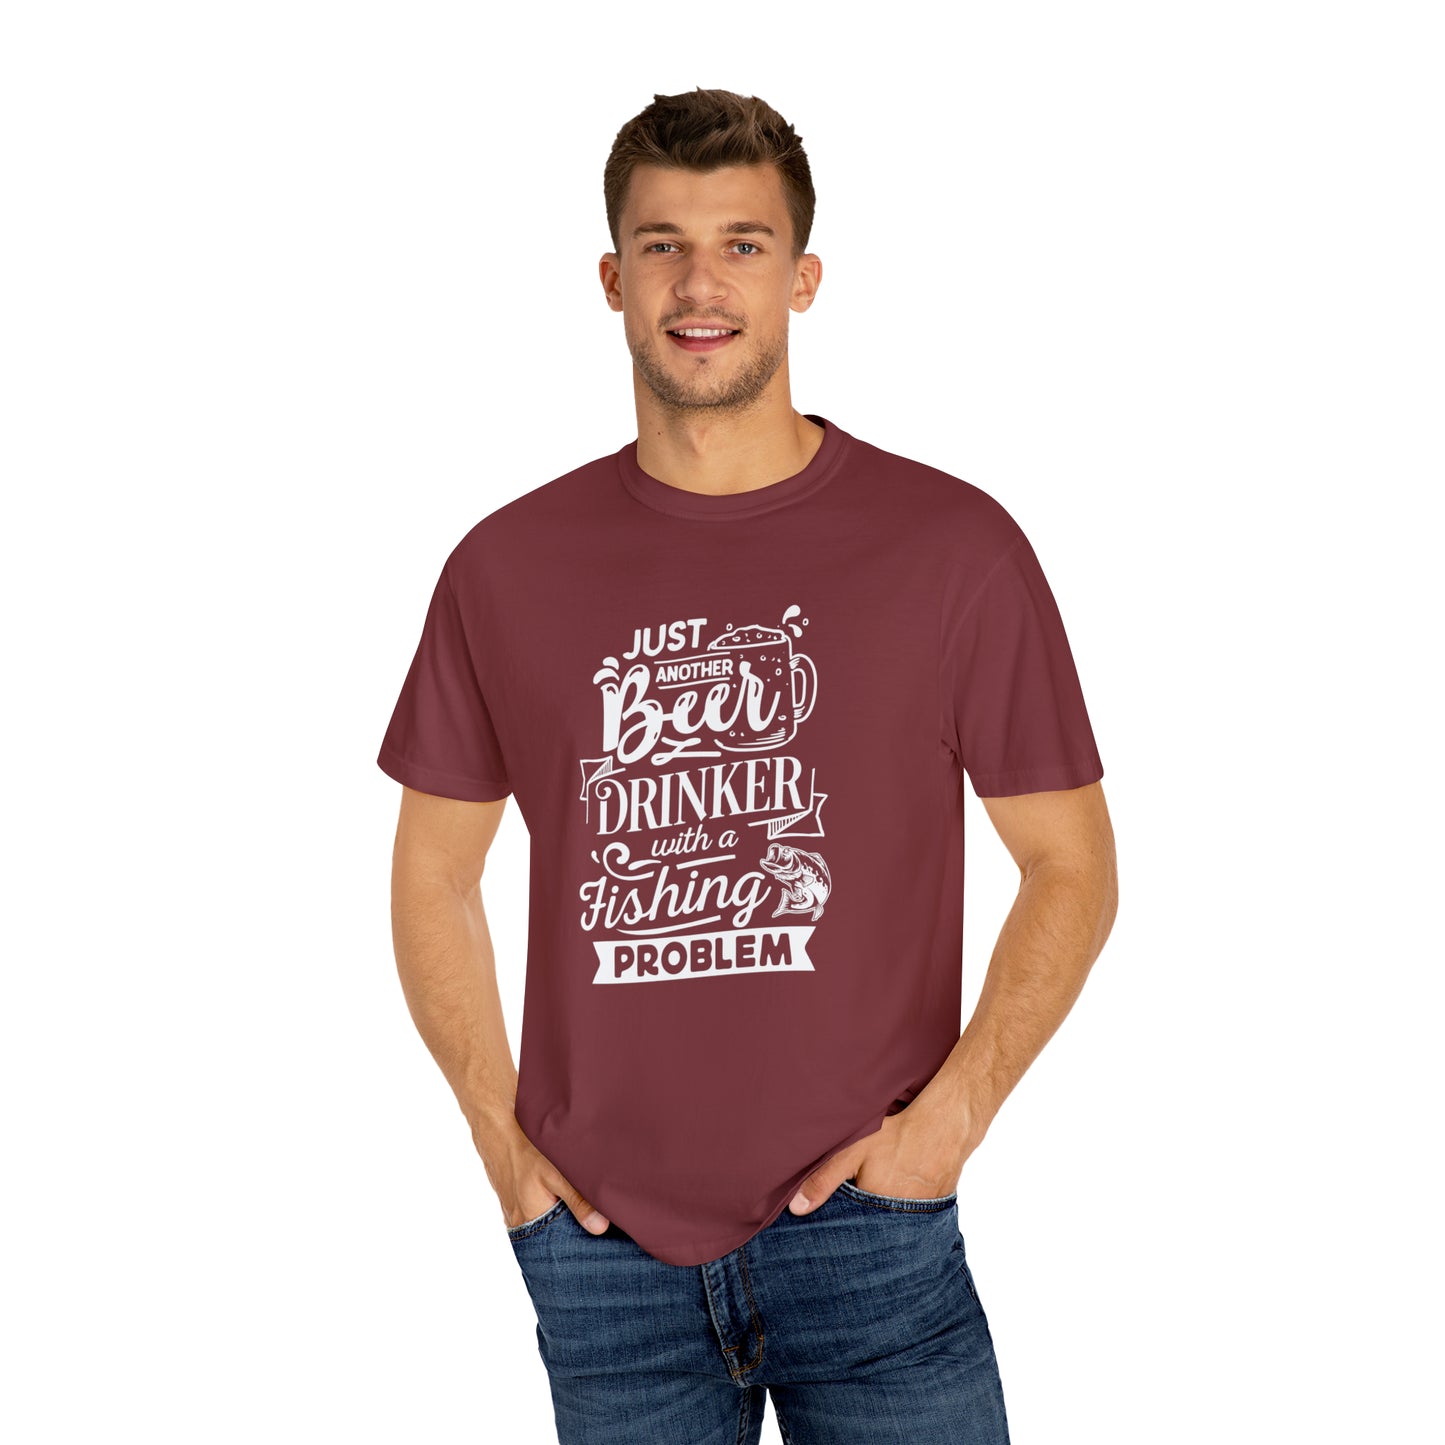 Fishing Addict Beer Enthusiast Tee: Embrace Your Passion for Both!